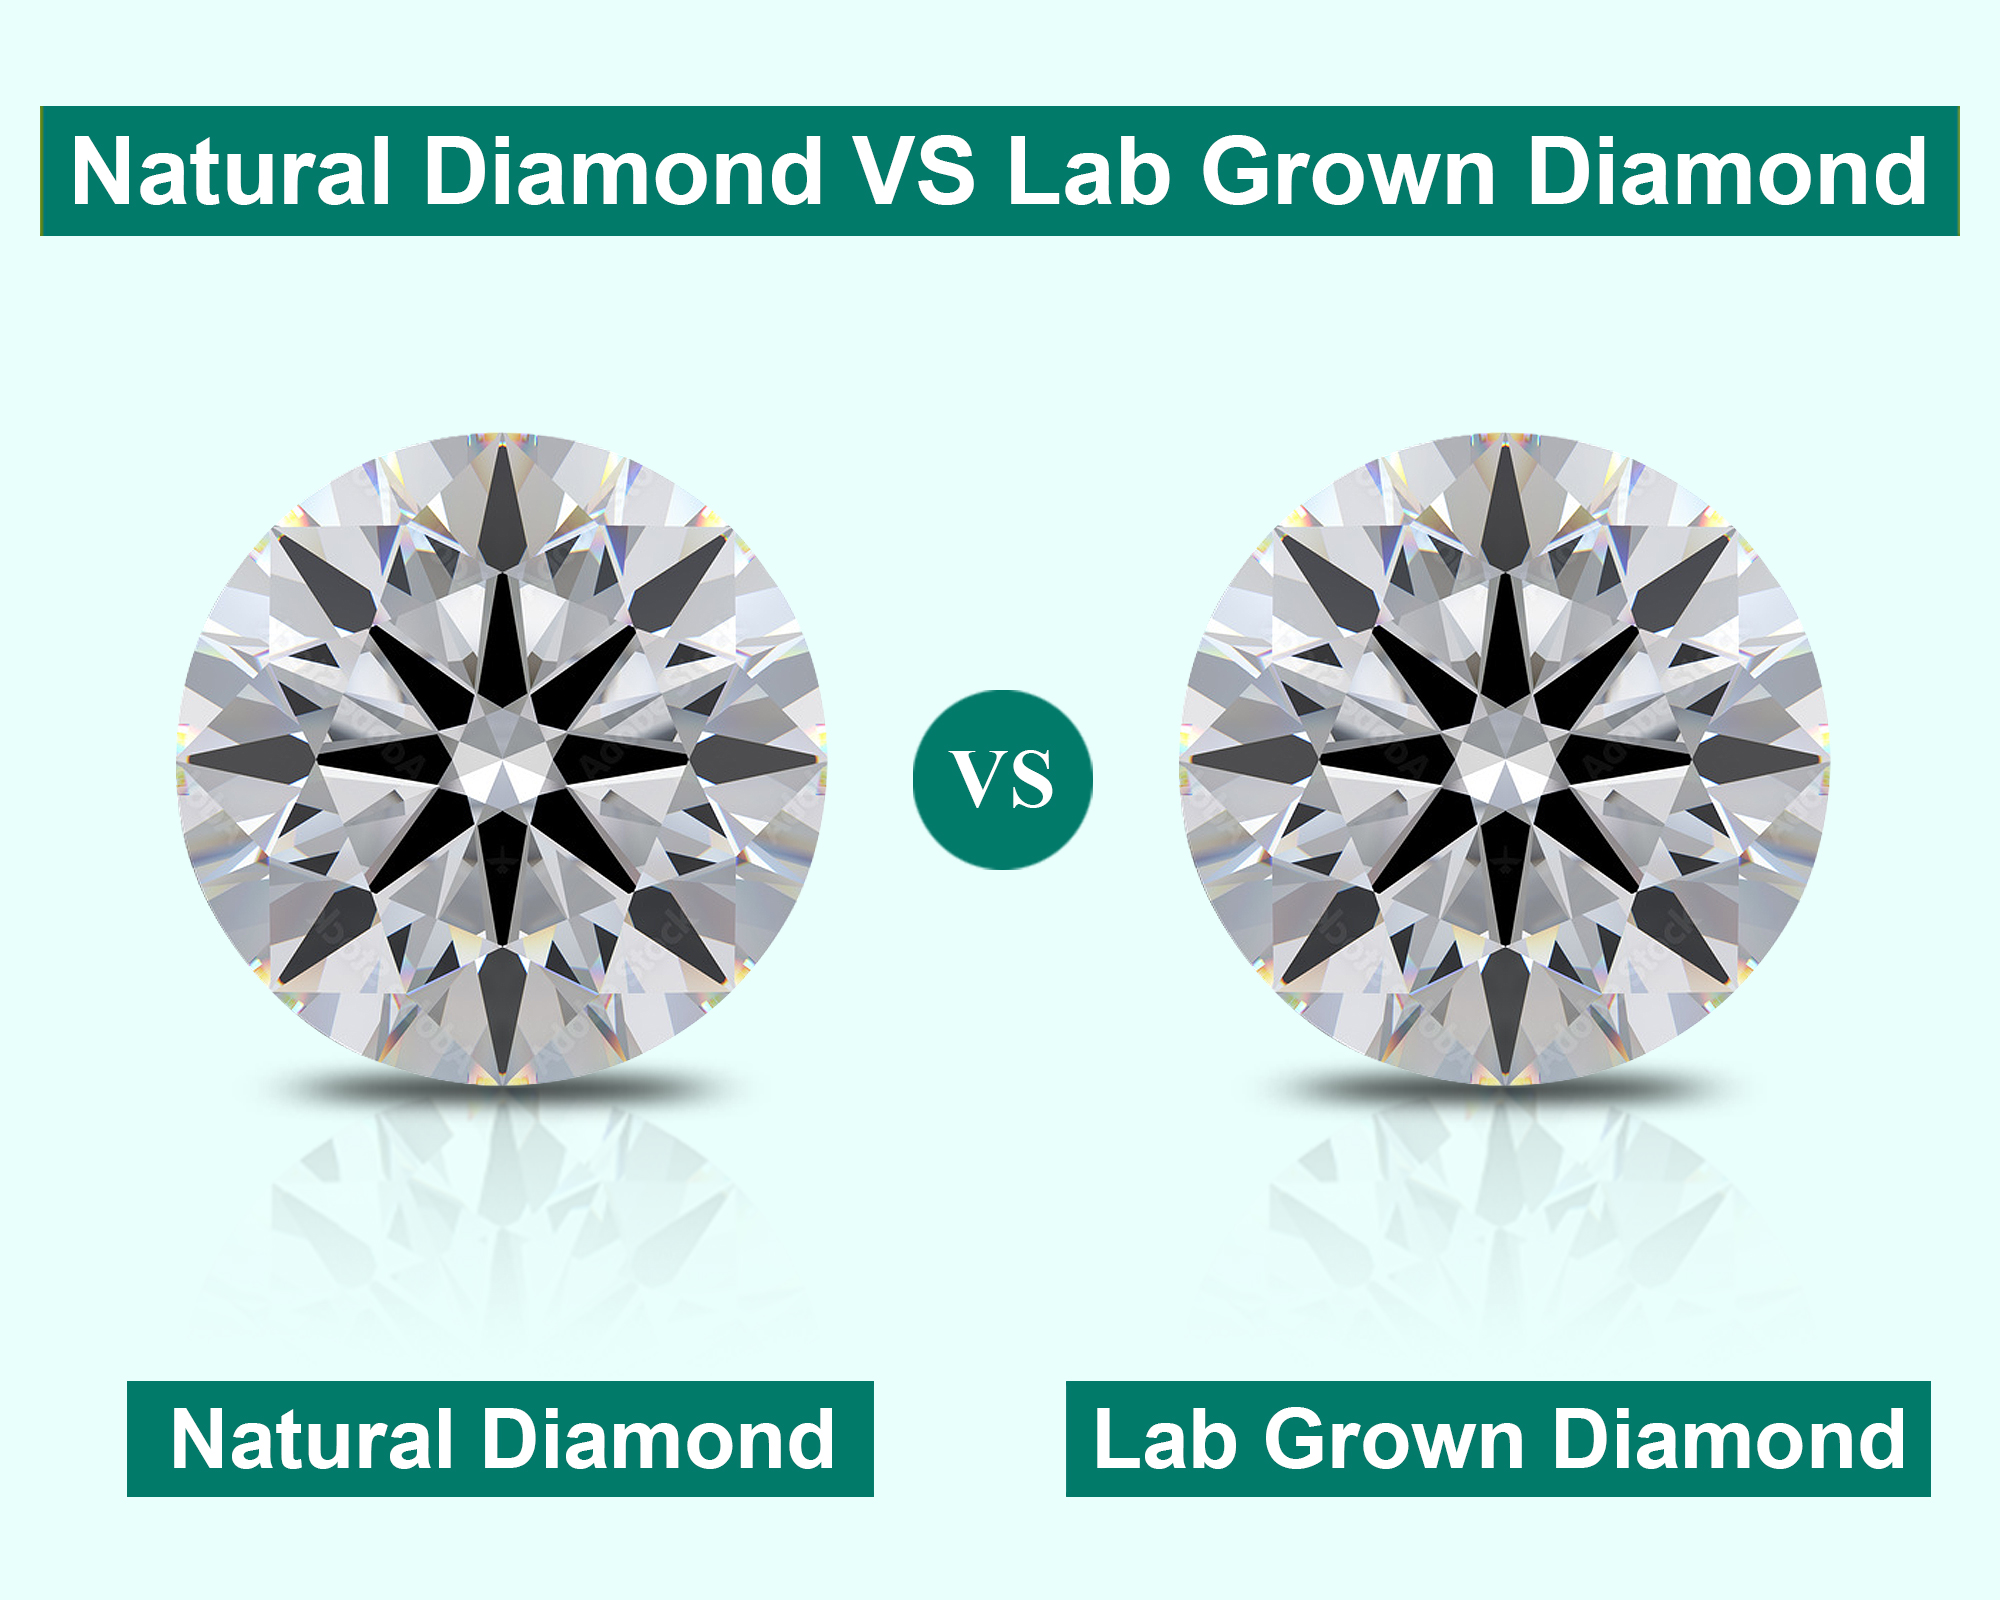 How can I tell the difference between natural and lab created diamonds